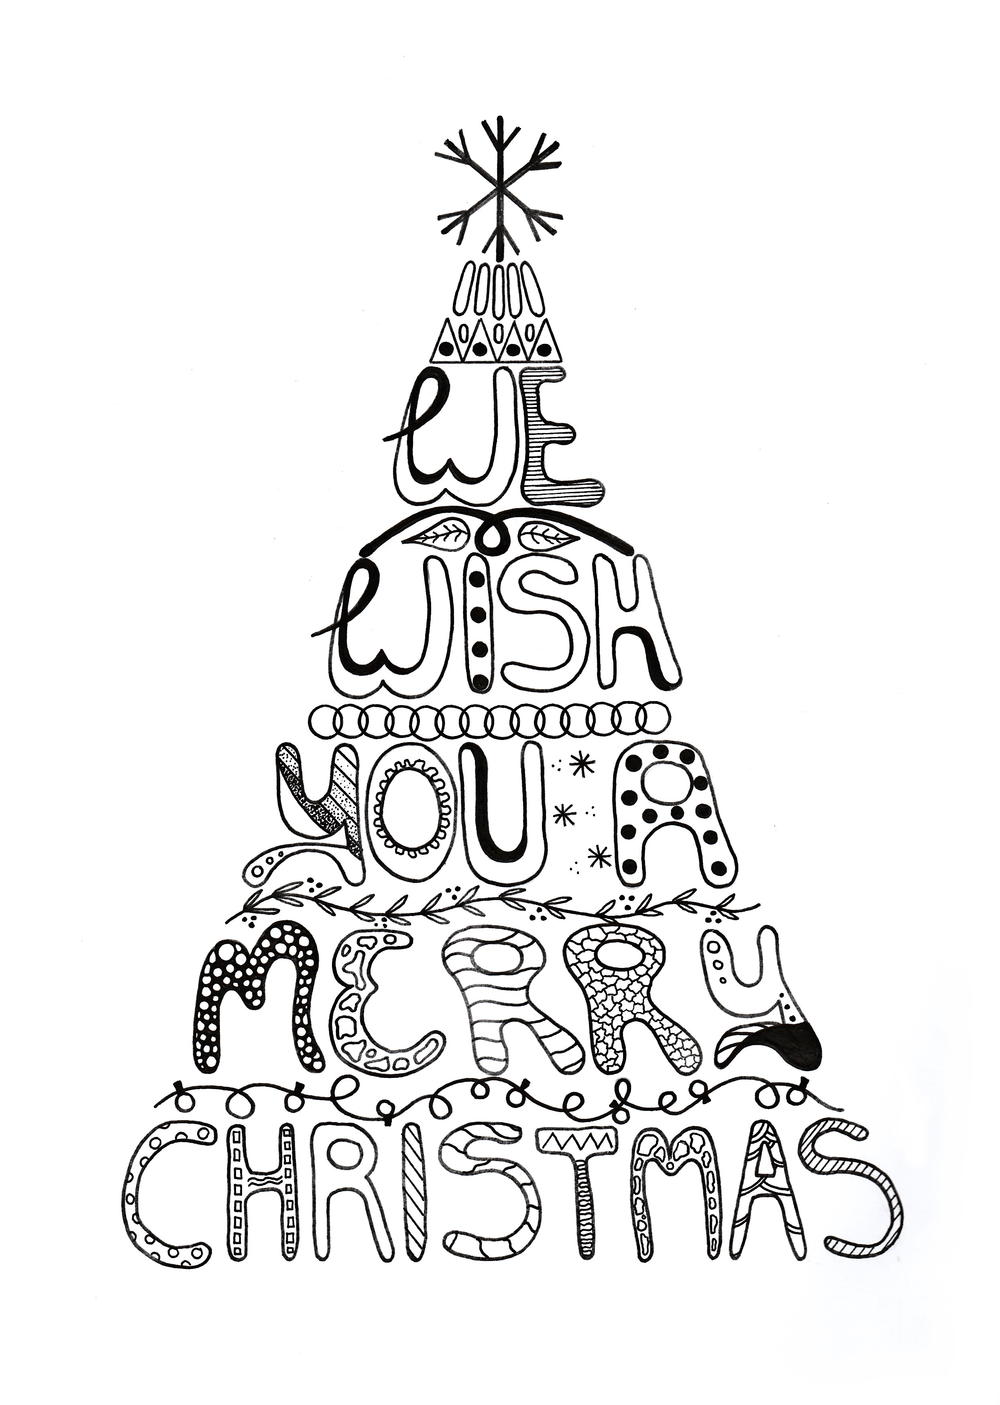 Download Merry Christmas Adult Coloring Page | AllFreePaperCrafts.com